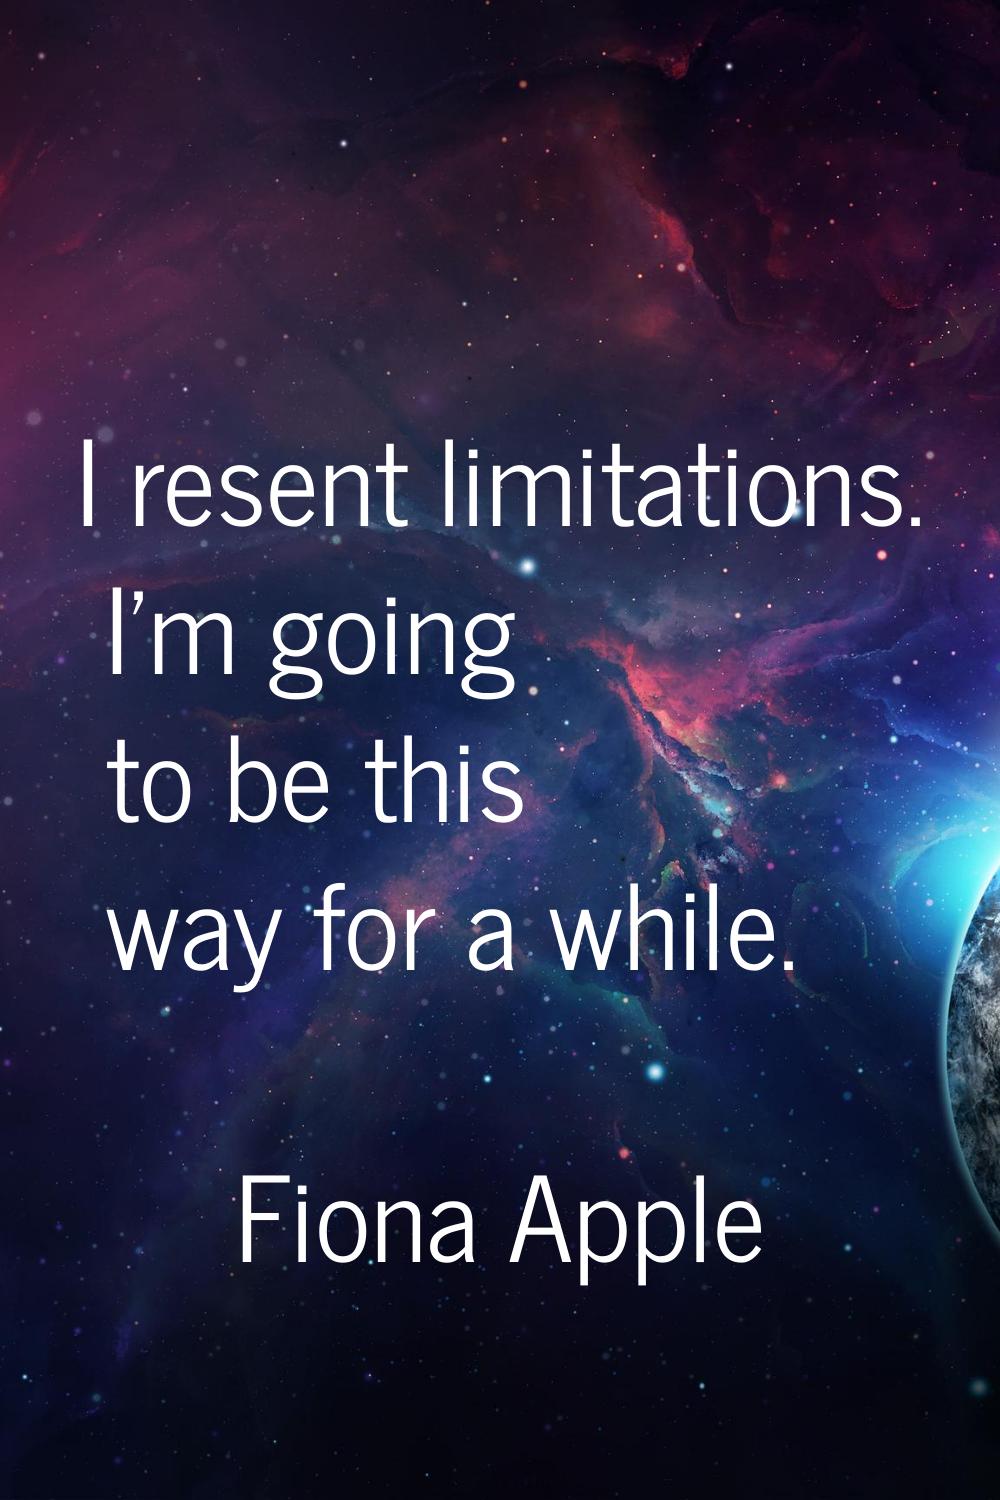 I resent limitations. I'm going to be this way for a while.